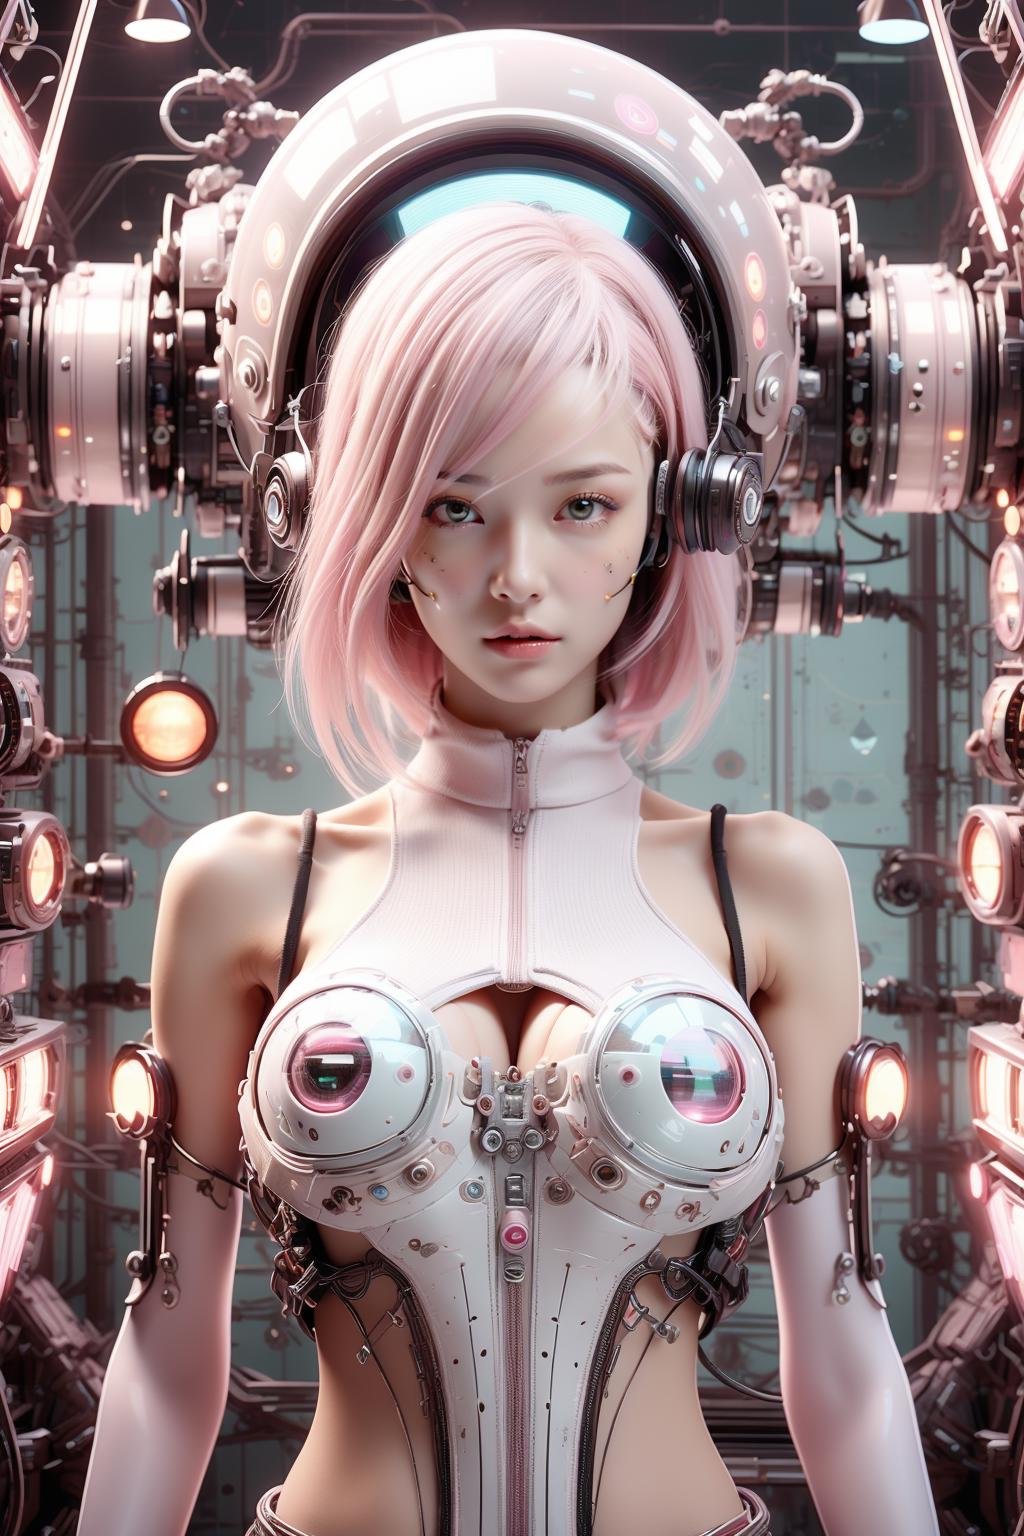 Best quality,masterpiece,ultra high res,(photorealistic:1.4),masterpiece,(bestquality),hyper-detailed,ultra-detailed,(1 girl:1.2),white bodysuit,(soft smile),(pink hair:1.4),mecha girl,headphones,glass helmet,bare shoulders,(cybernetic),(mecha suit),(futuristic),(combat attire),(mix of organic and inorganic),(exposed circuitry),(glowing eyes),(massive scale),(mono-eyed),(weaponized),(gleaming metal),(futuristic background),(mechanical beauty),(technology wonder),full body,<lora:softmecha-000003:0.7>,<lora:cartoon_portrait_v2:0.3>,<lora:AdsTech:0.8>,<lora:Clothing -:0.7>,